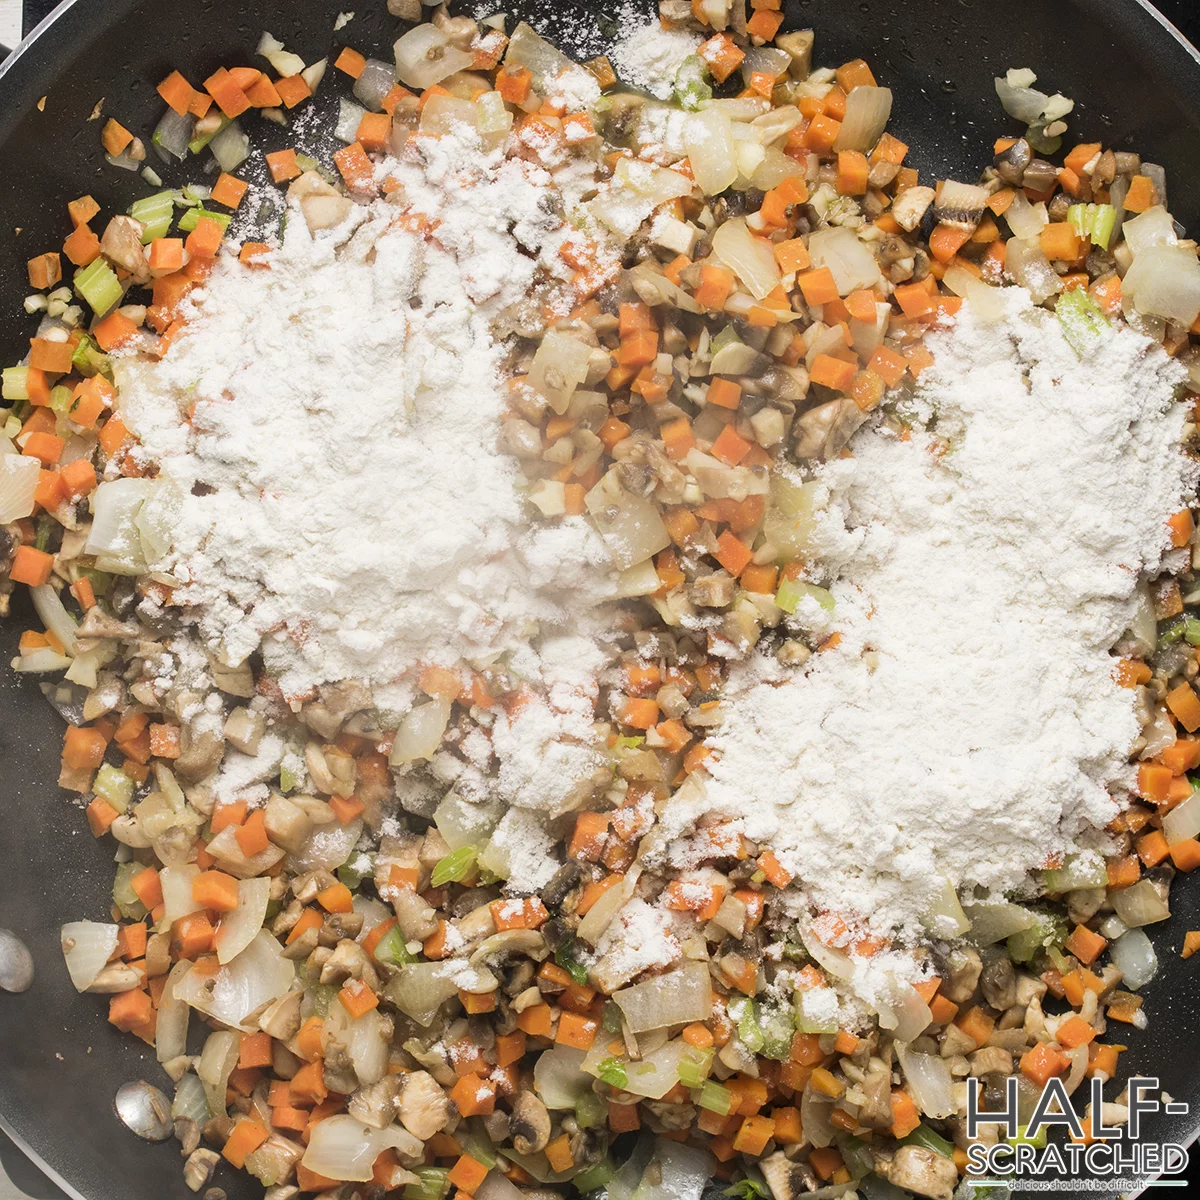 Adding flour to fried vegetables